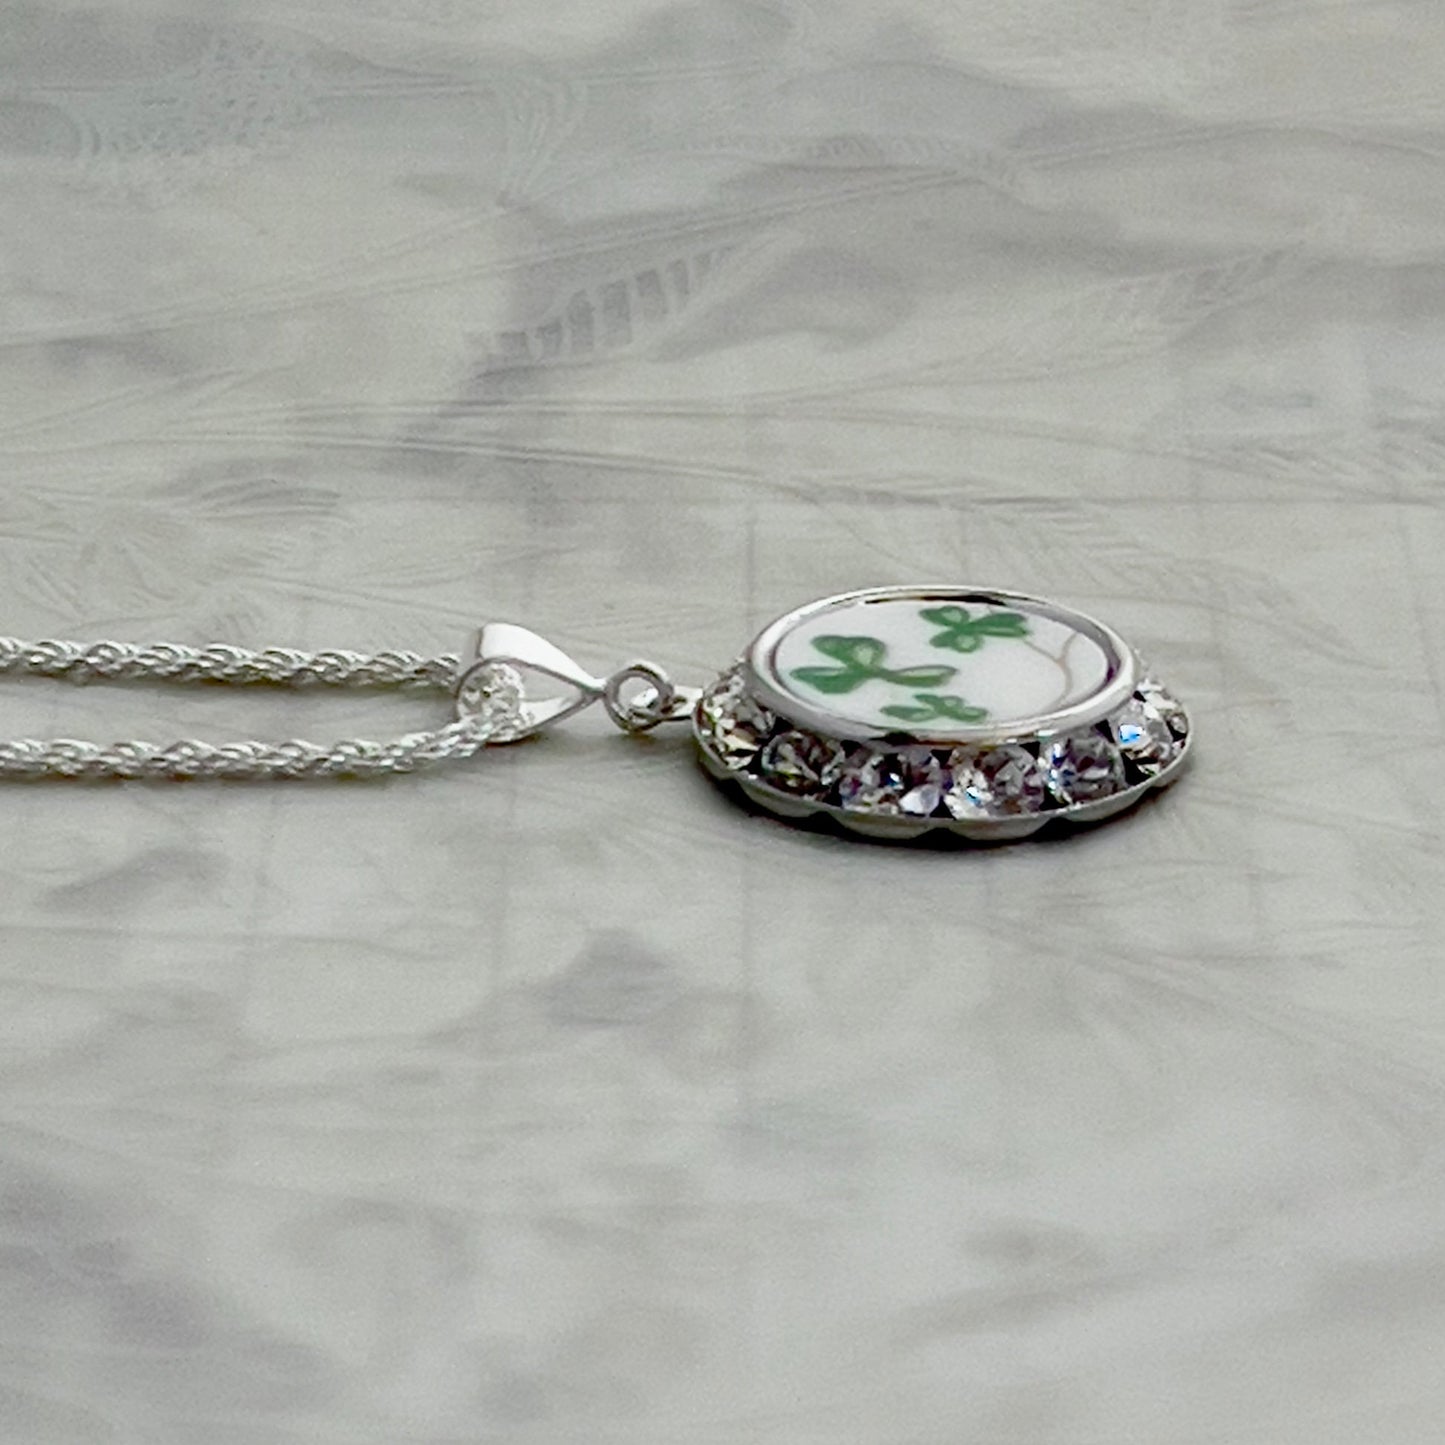 Royal Tara China Necklace, Celtic Broken China Jewelry Crystal Necklace, Unique Irish Jewelry for Women, 20th Anniversary Gift for Wife